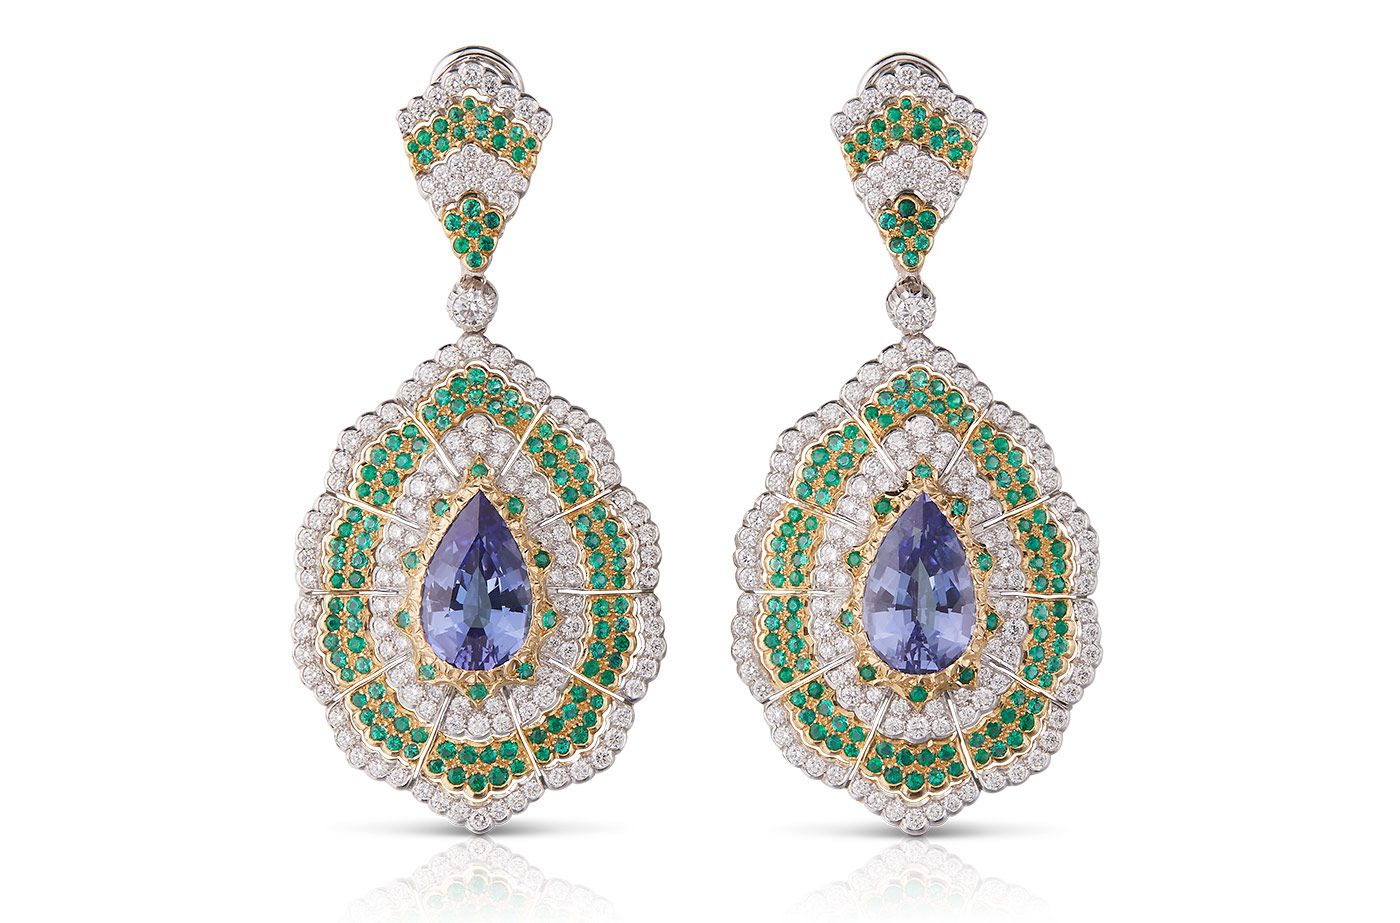 Glorious Garden Buccellati S High Jewellery Blooms With Colour